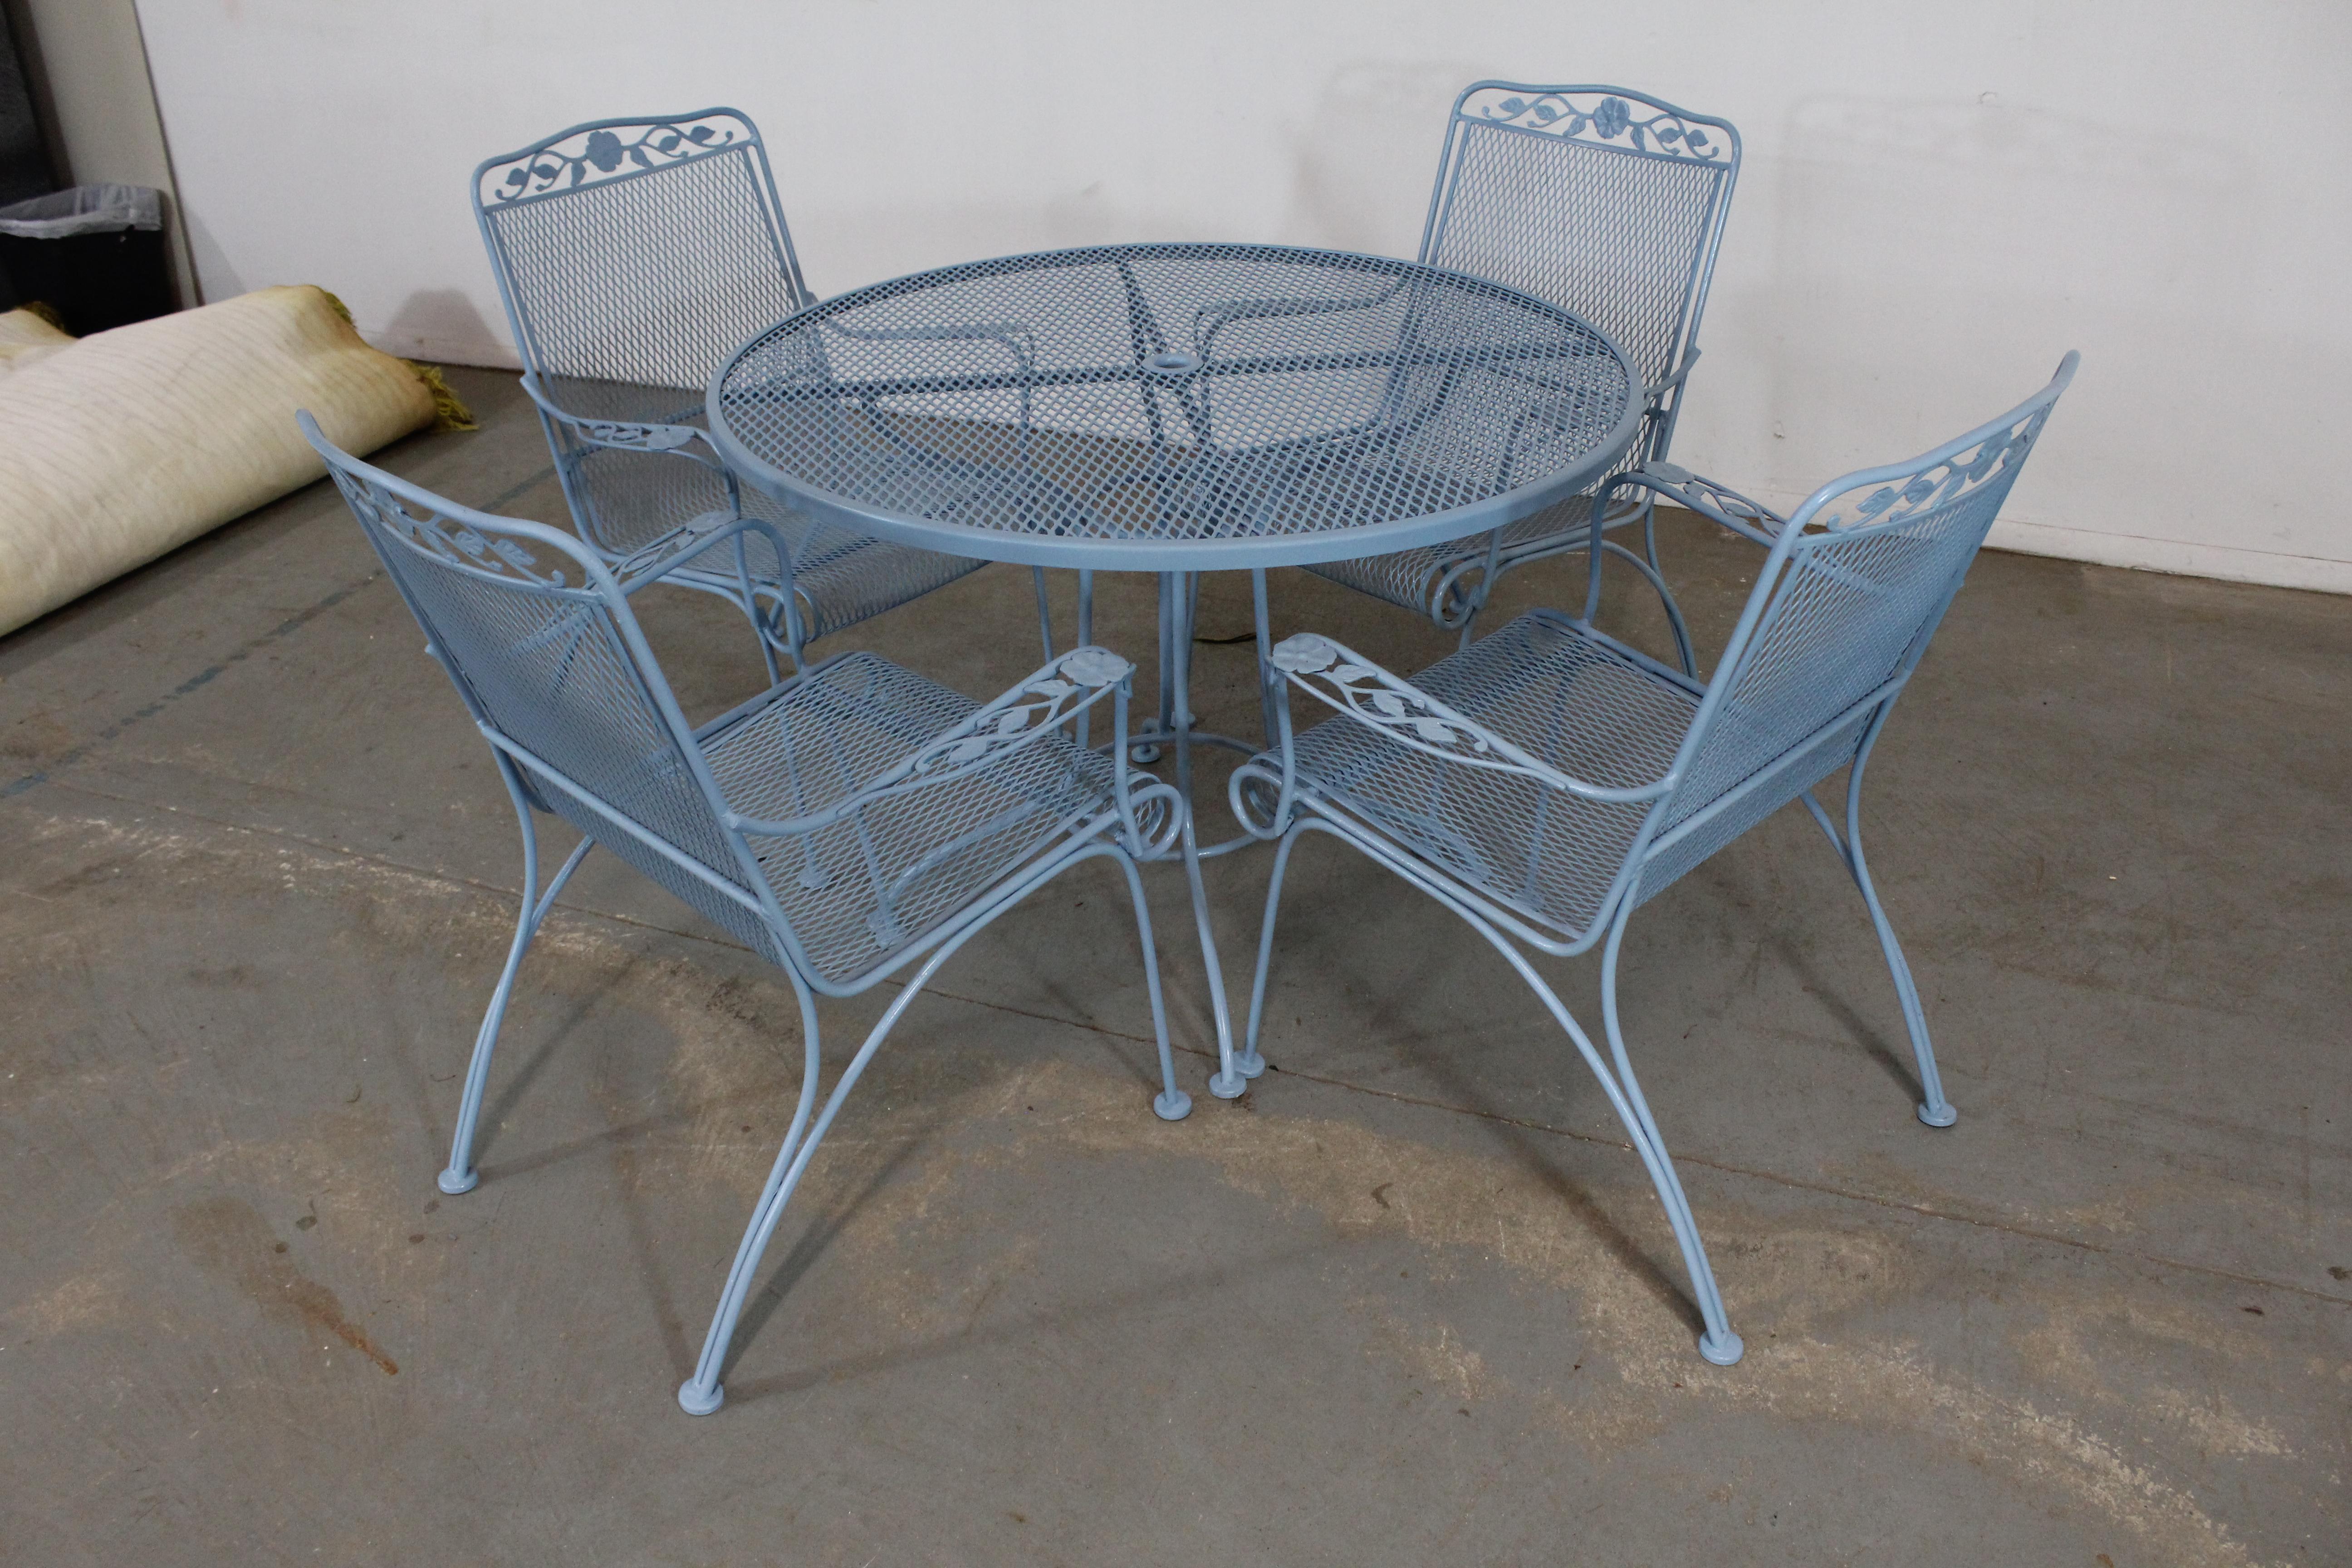 Mid-Century Woodard Outdoor Table and 4 Chairs in French Blue
Offered is a Vintage Woodard Outdoor table and 4 Chairs . A great set for tight spaces as the table is only 41.5